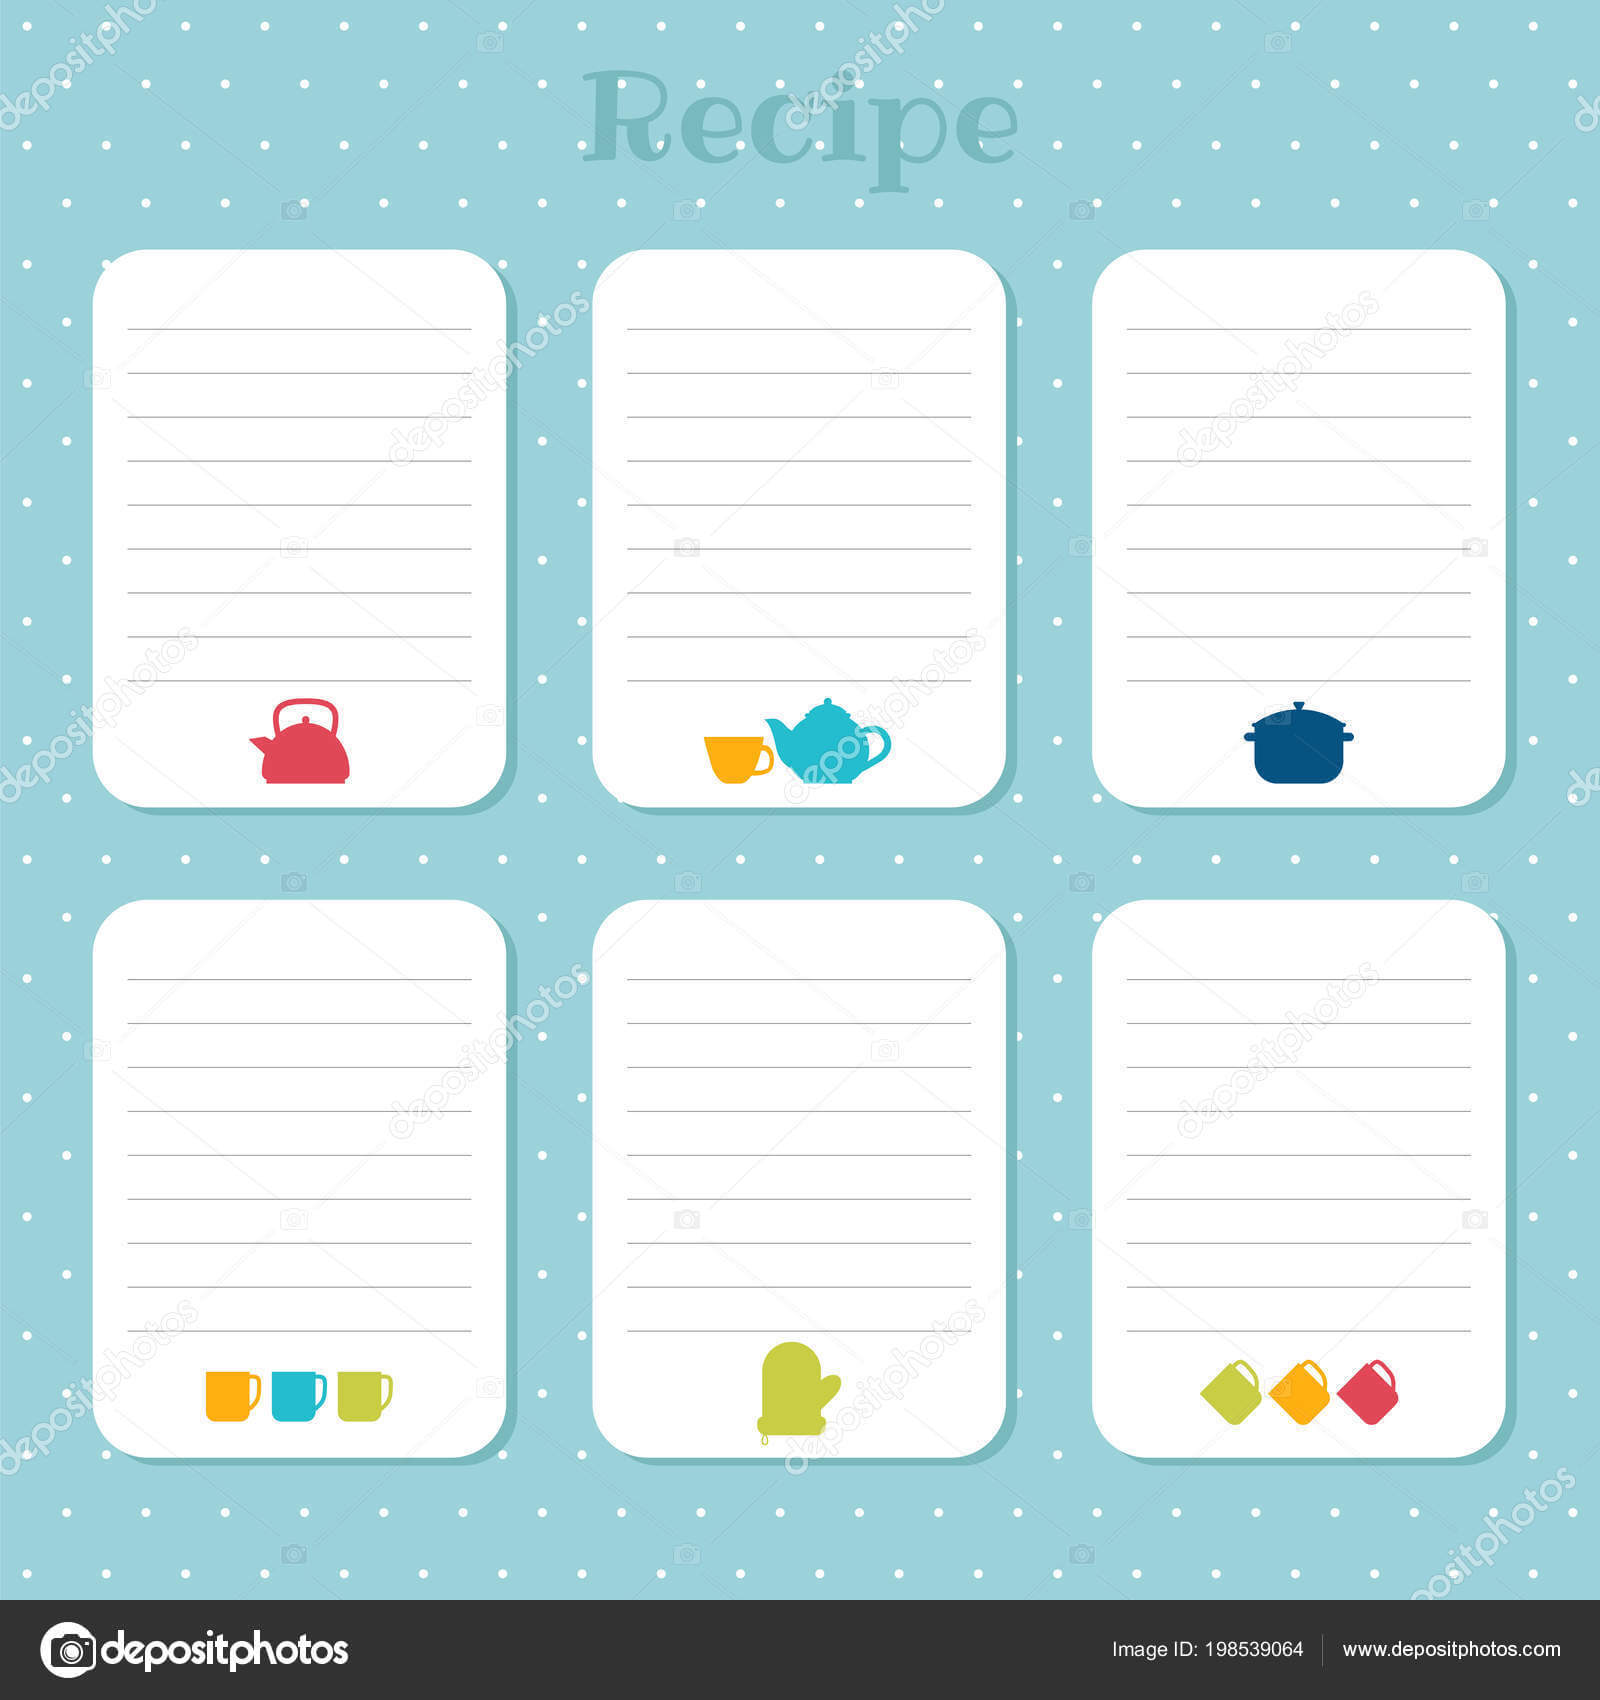 Recipe Card Templates | Recipe Cards Set Cooking Card With Restaurant Recipe Card Template